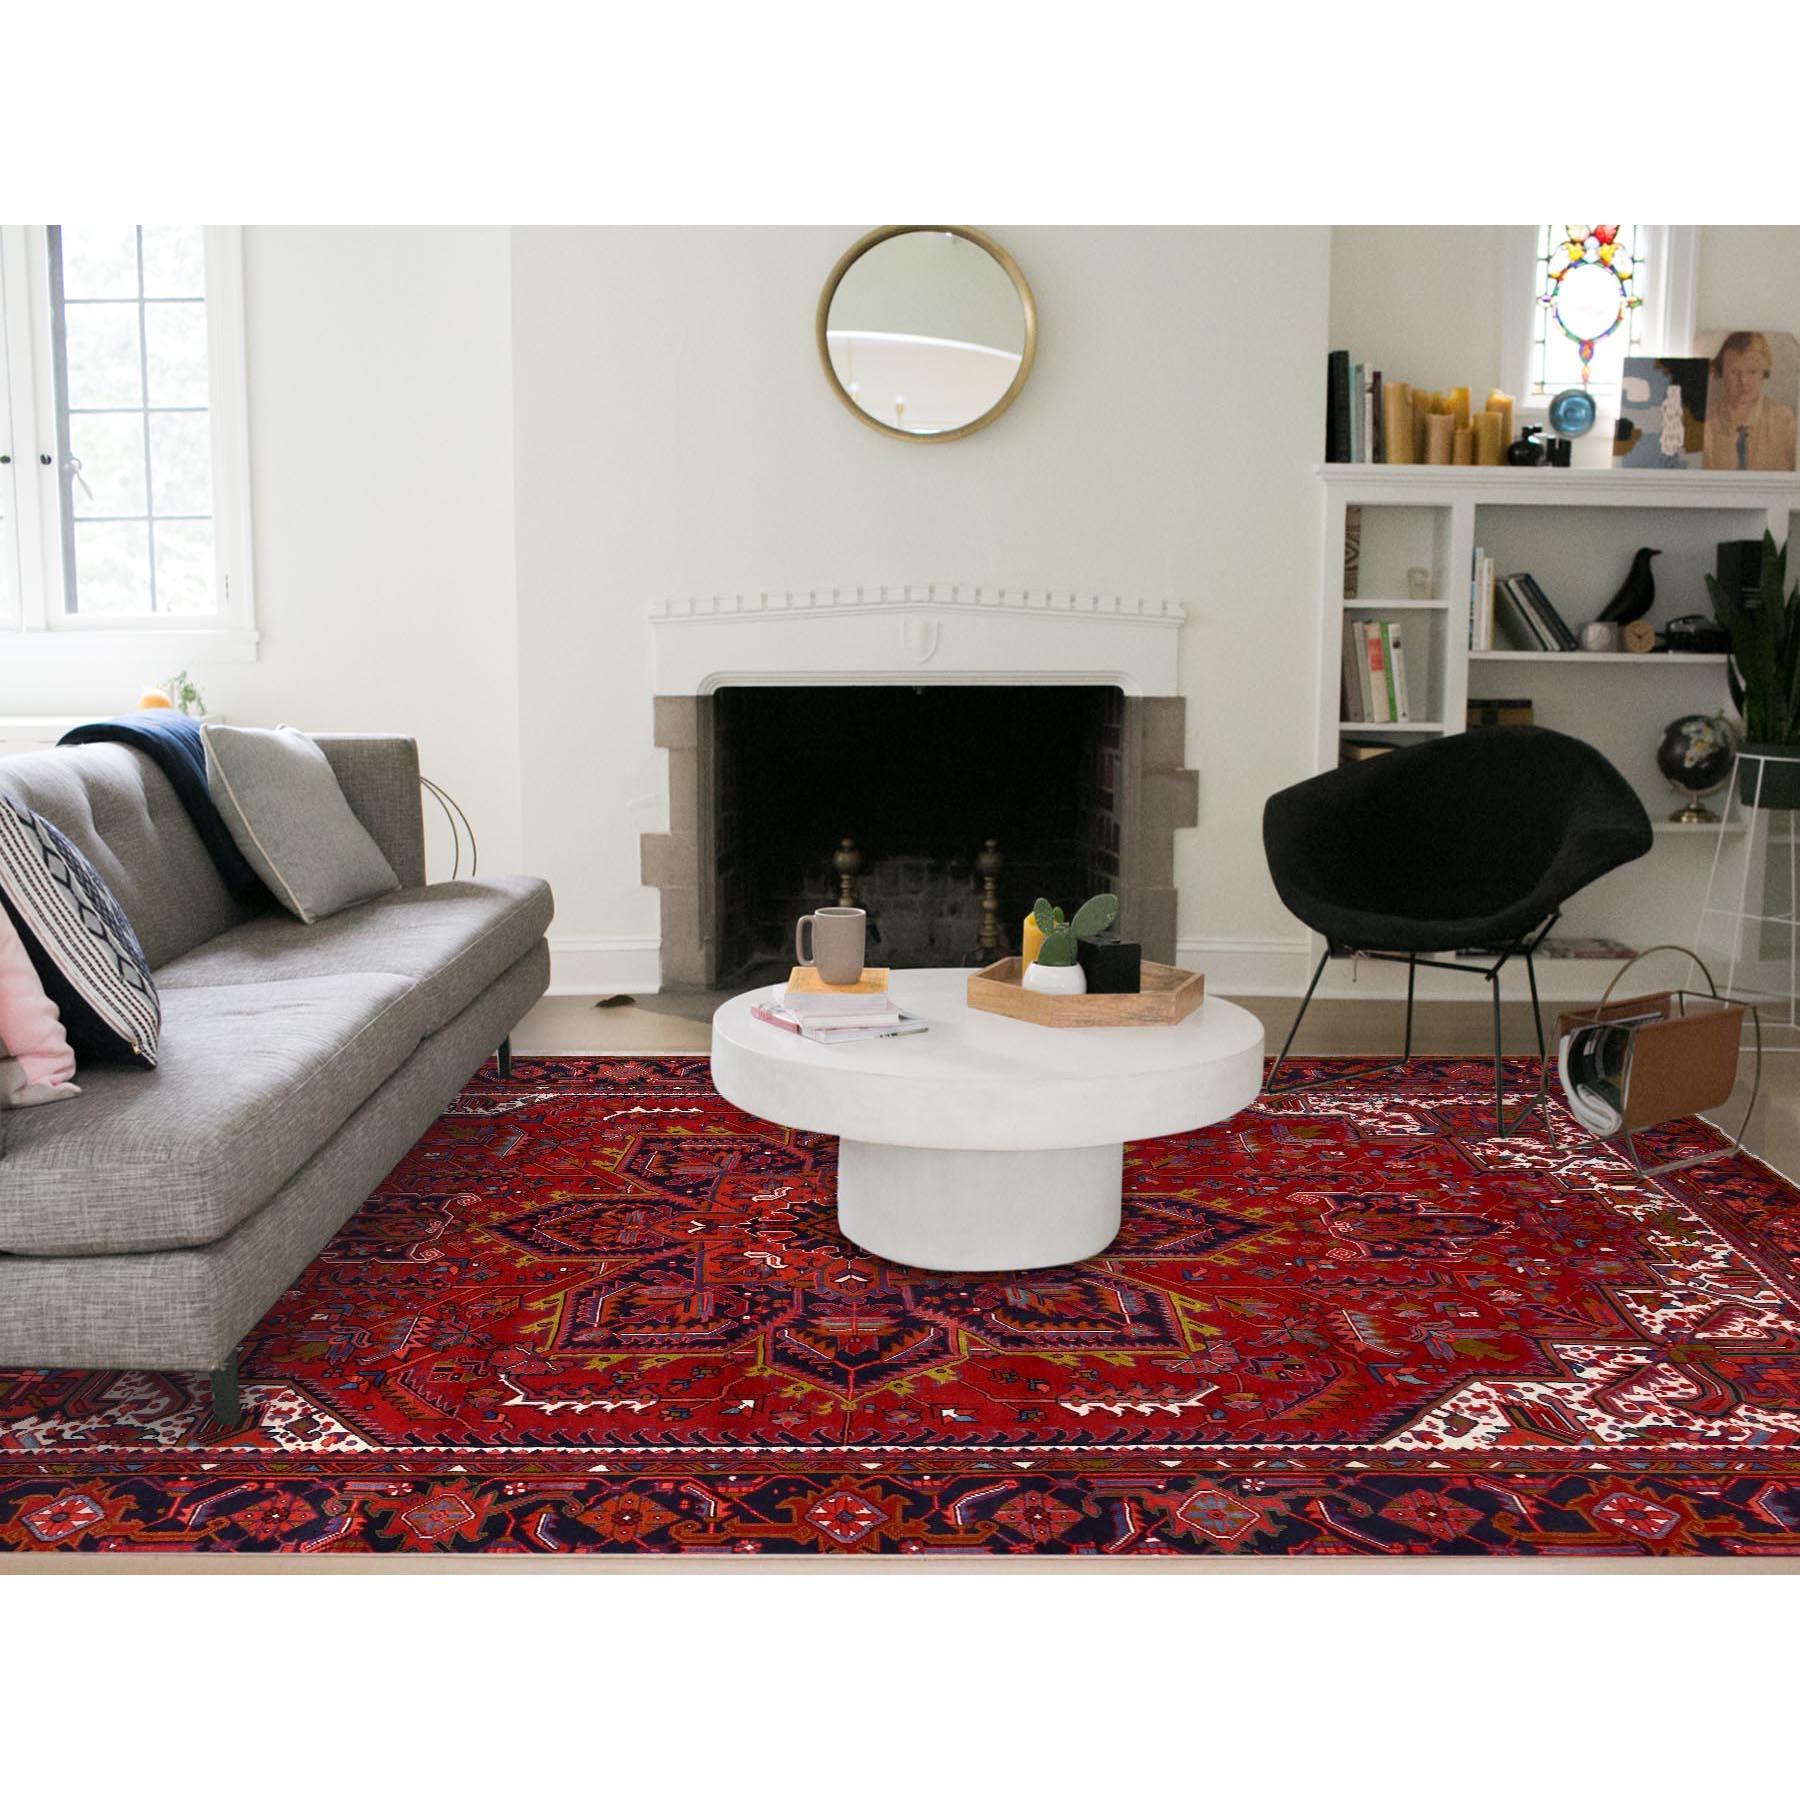 This fabulous Hand-Knotted carpet has been created and designed for extra strength and durability. This rug has been handcrafted for weeks in the traditional method that is used to make
Exact Rug Size in Feet and Inches : 10' x 12'9